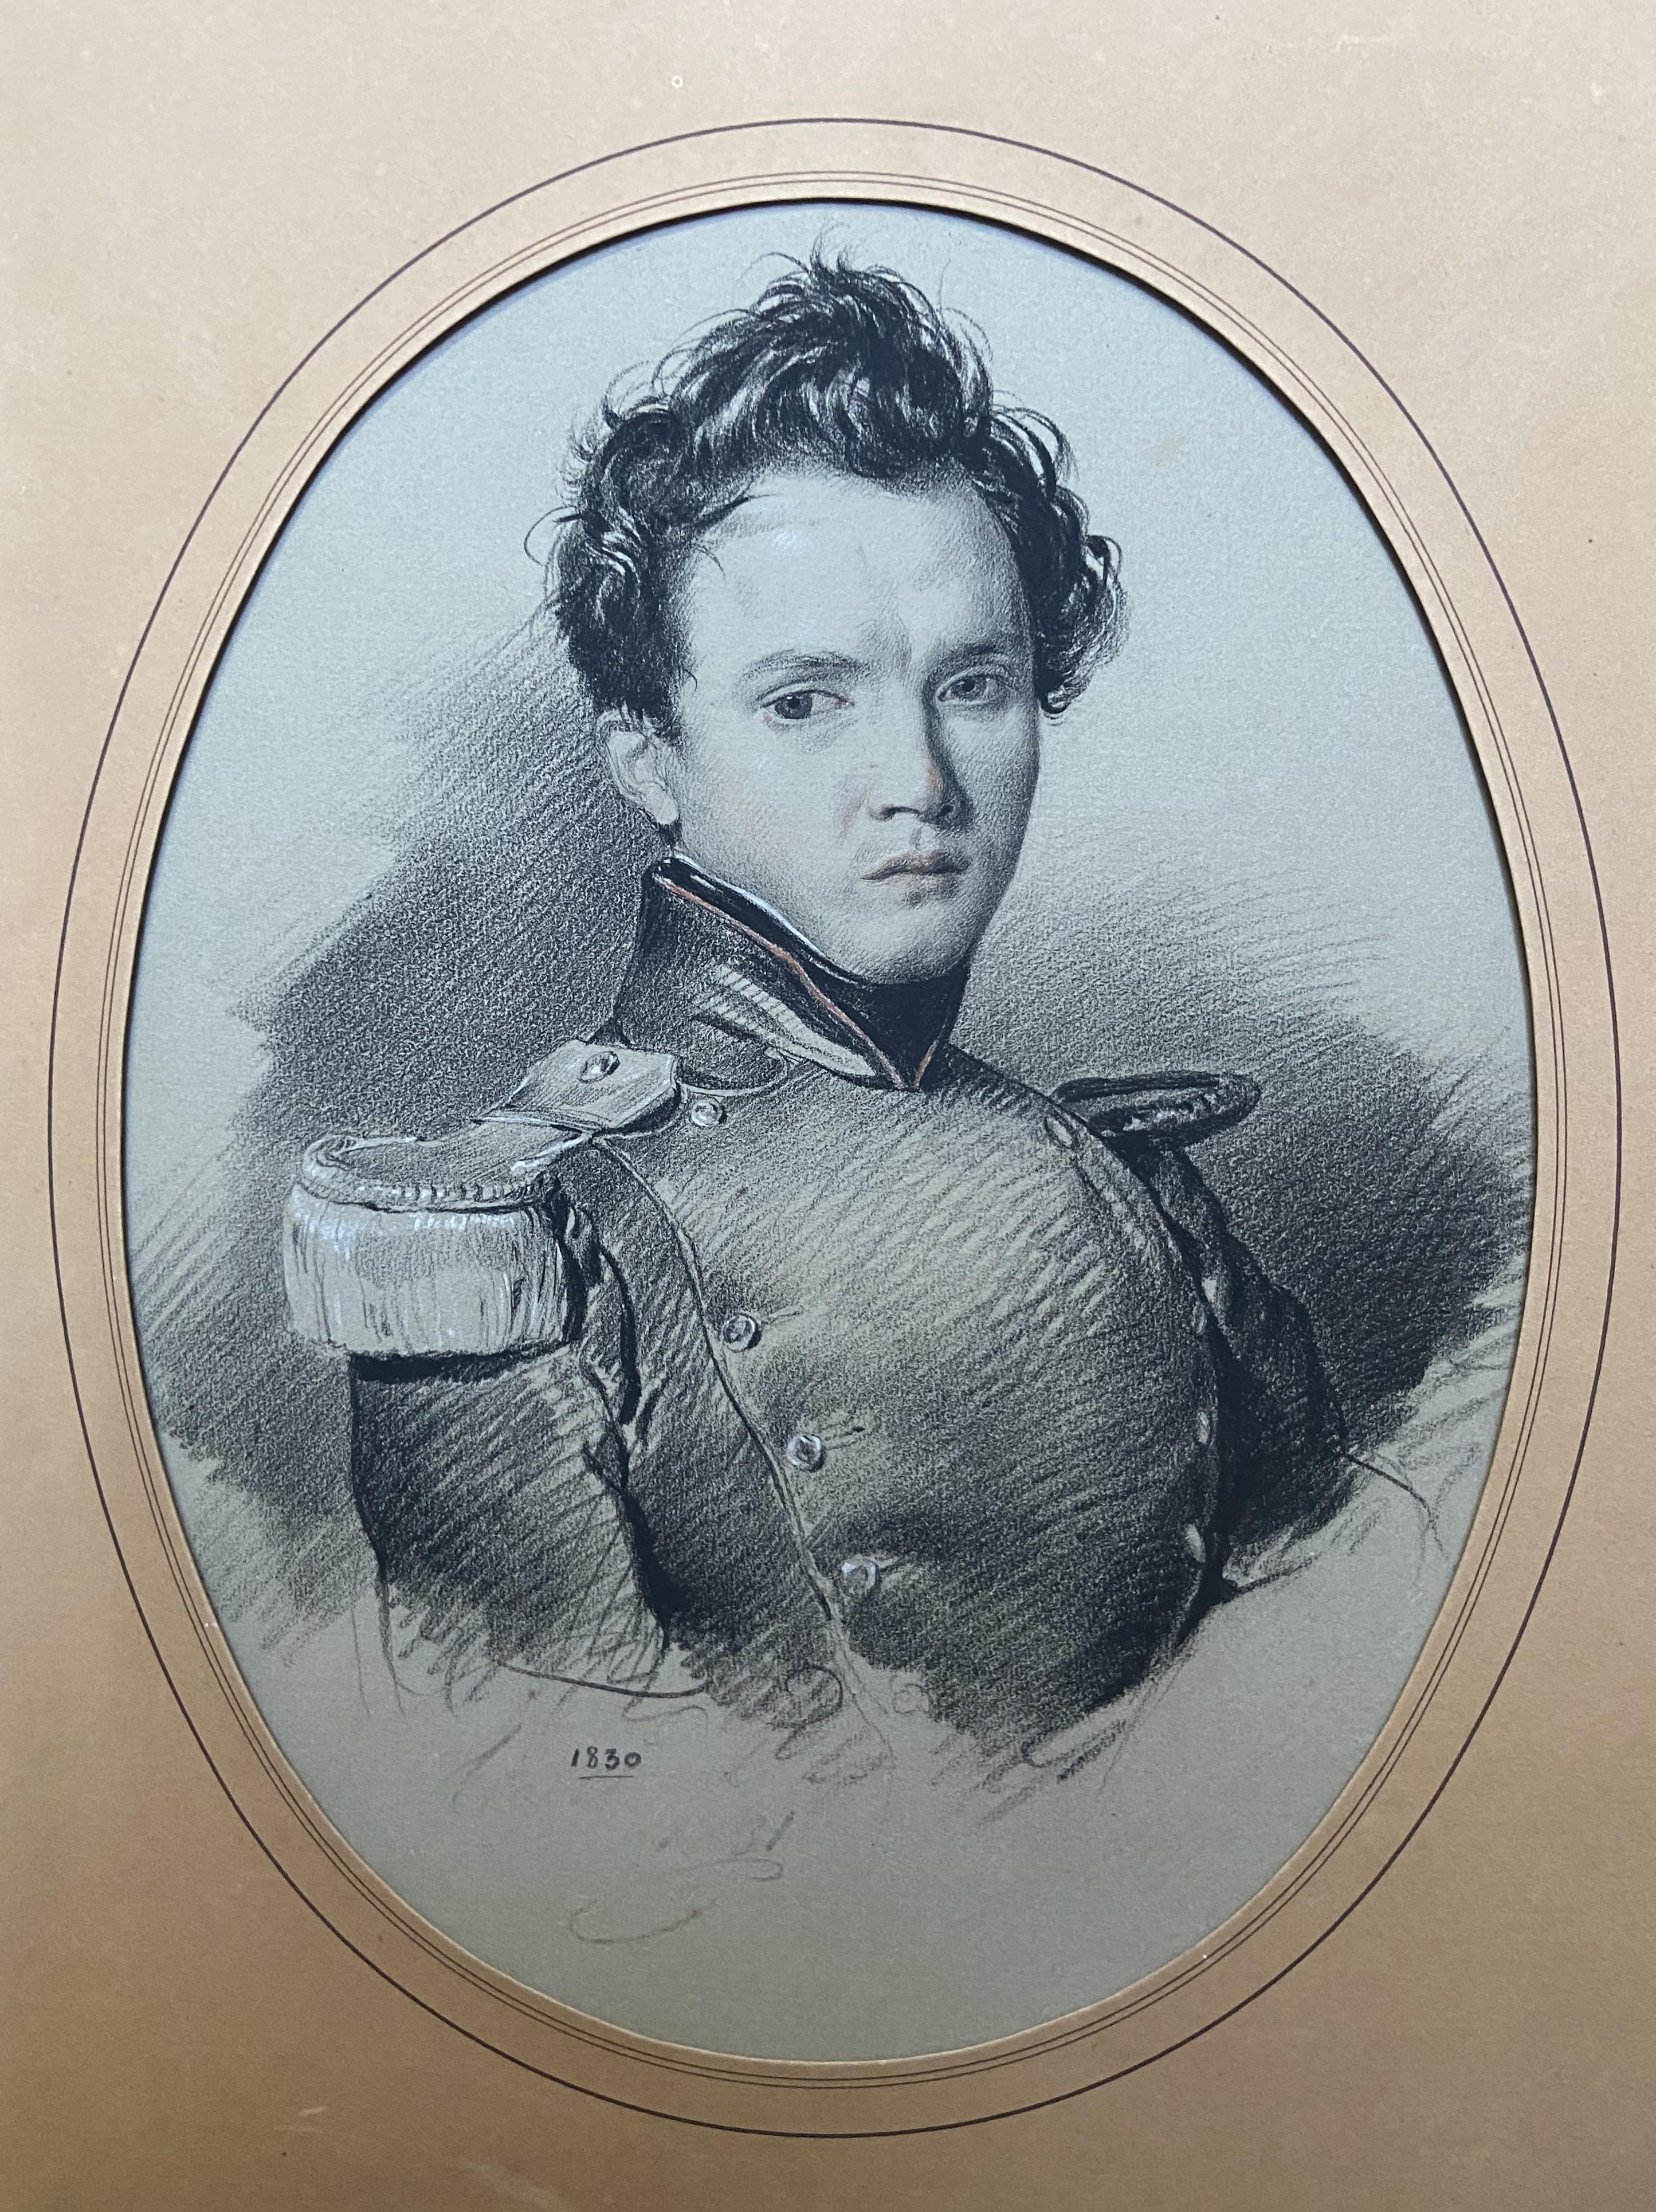 French School 19th Century, Portrait of a young soldier, dated 1830, drawing - Romantic Art by Unknown